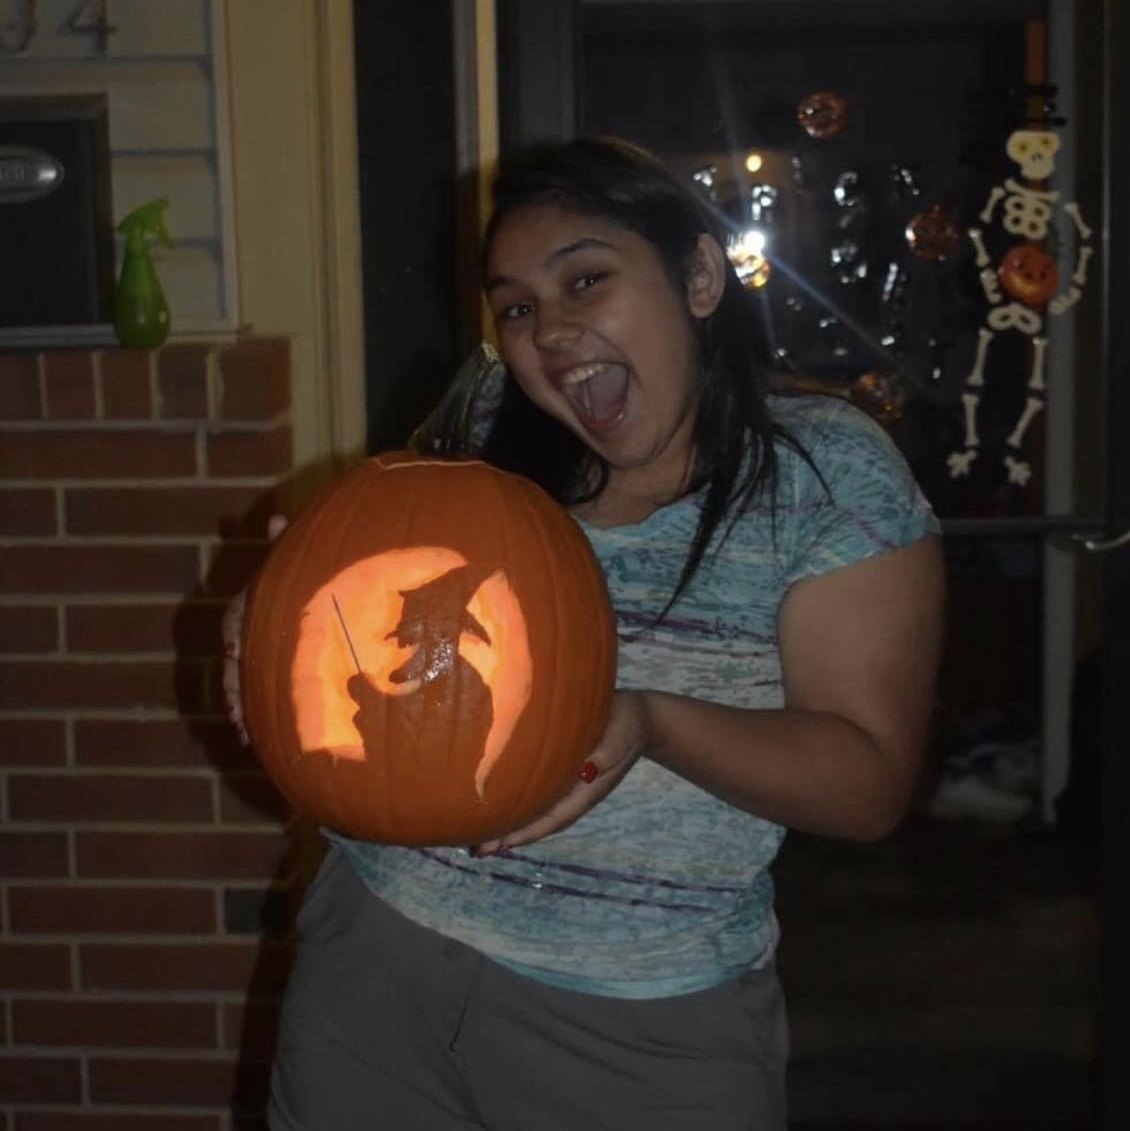 Saba holding a carved pumpkin with a witch on it.